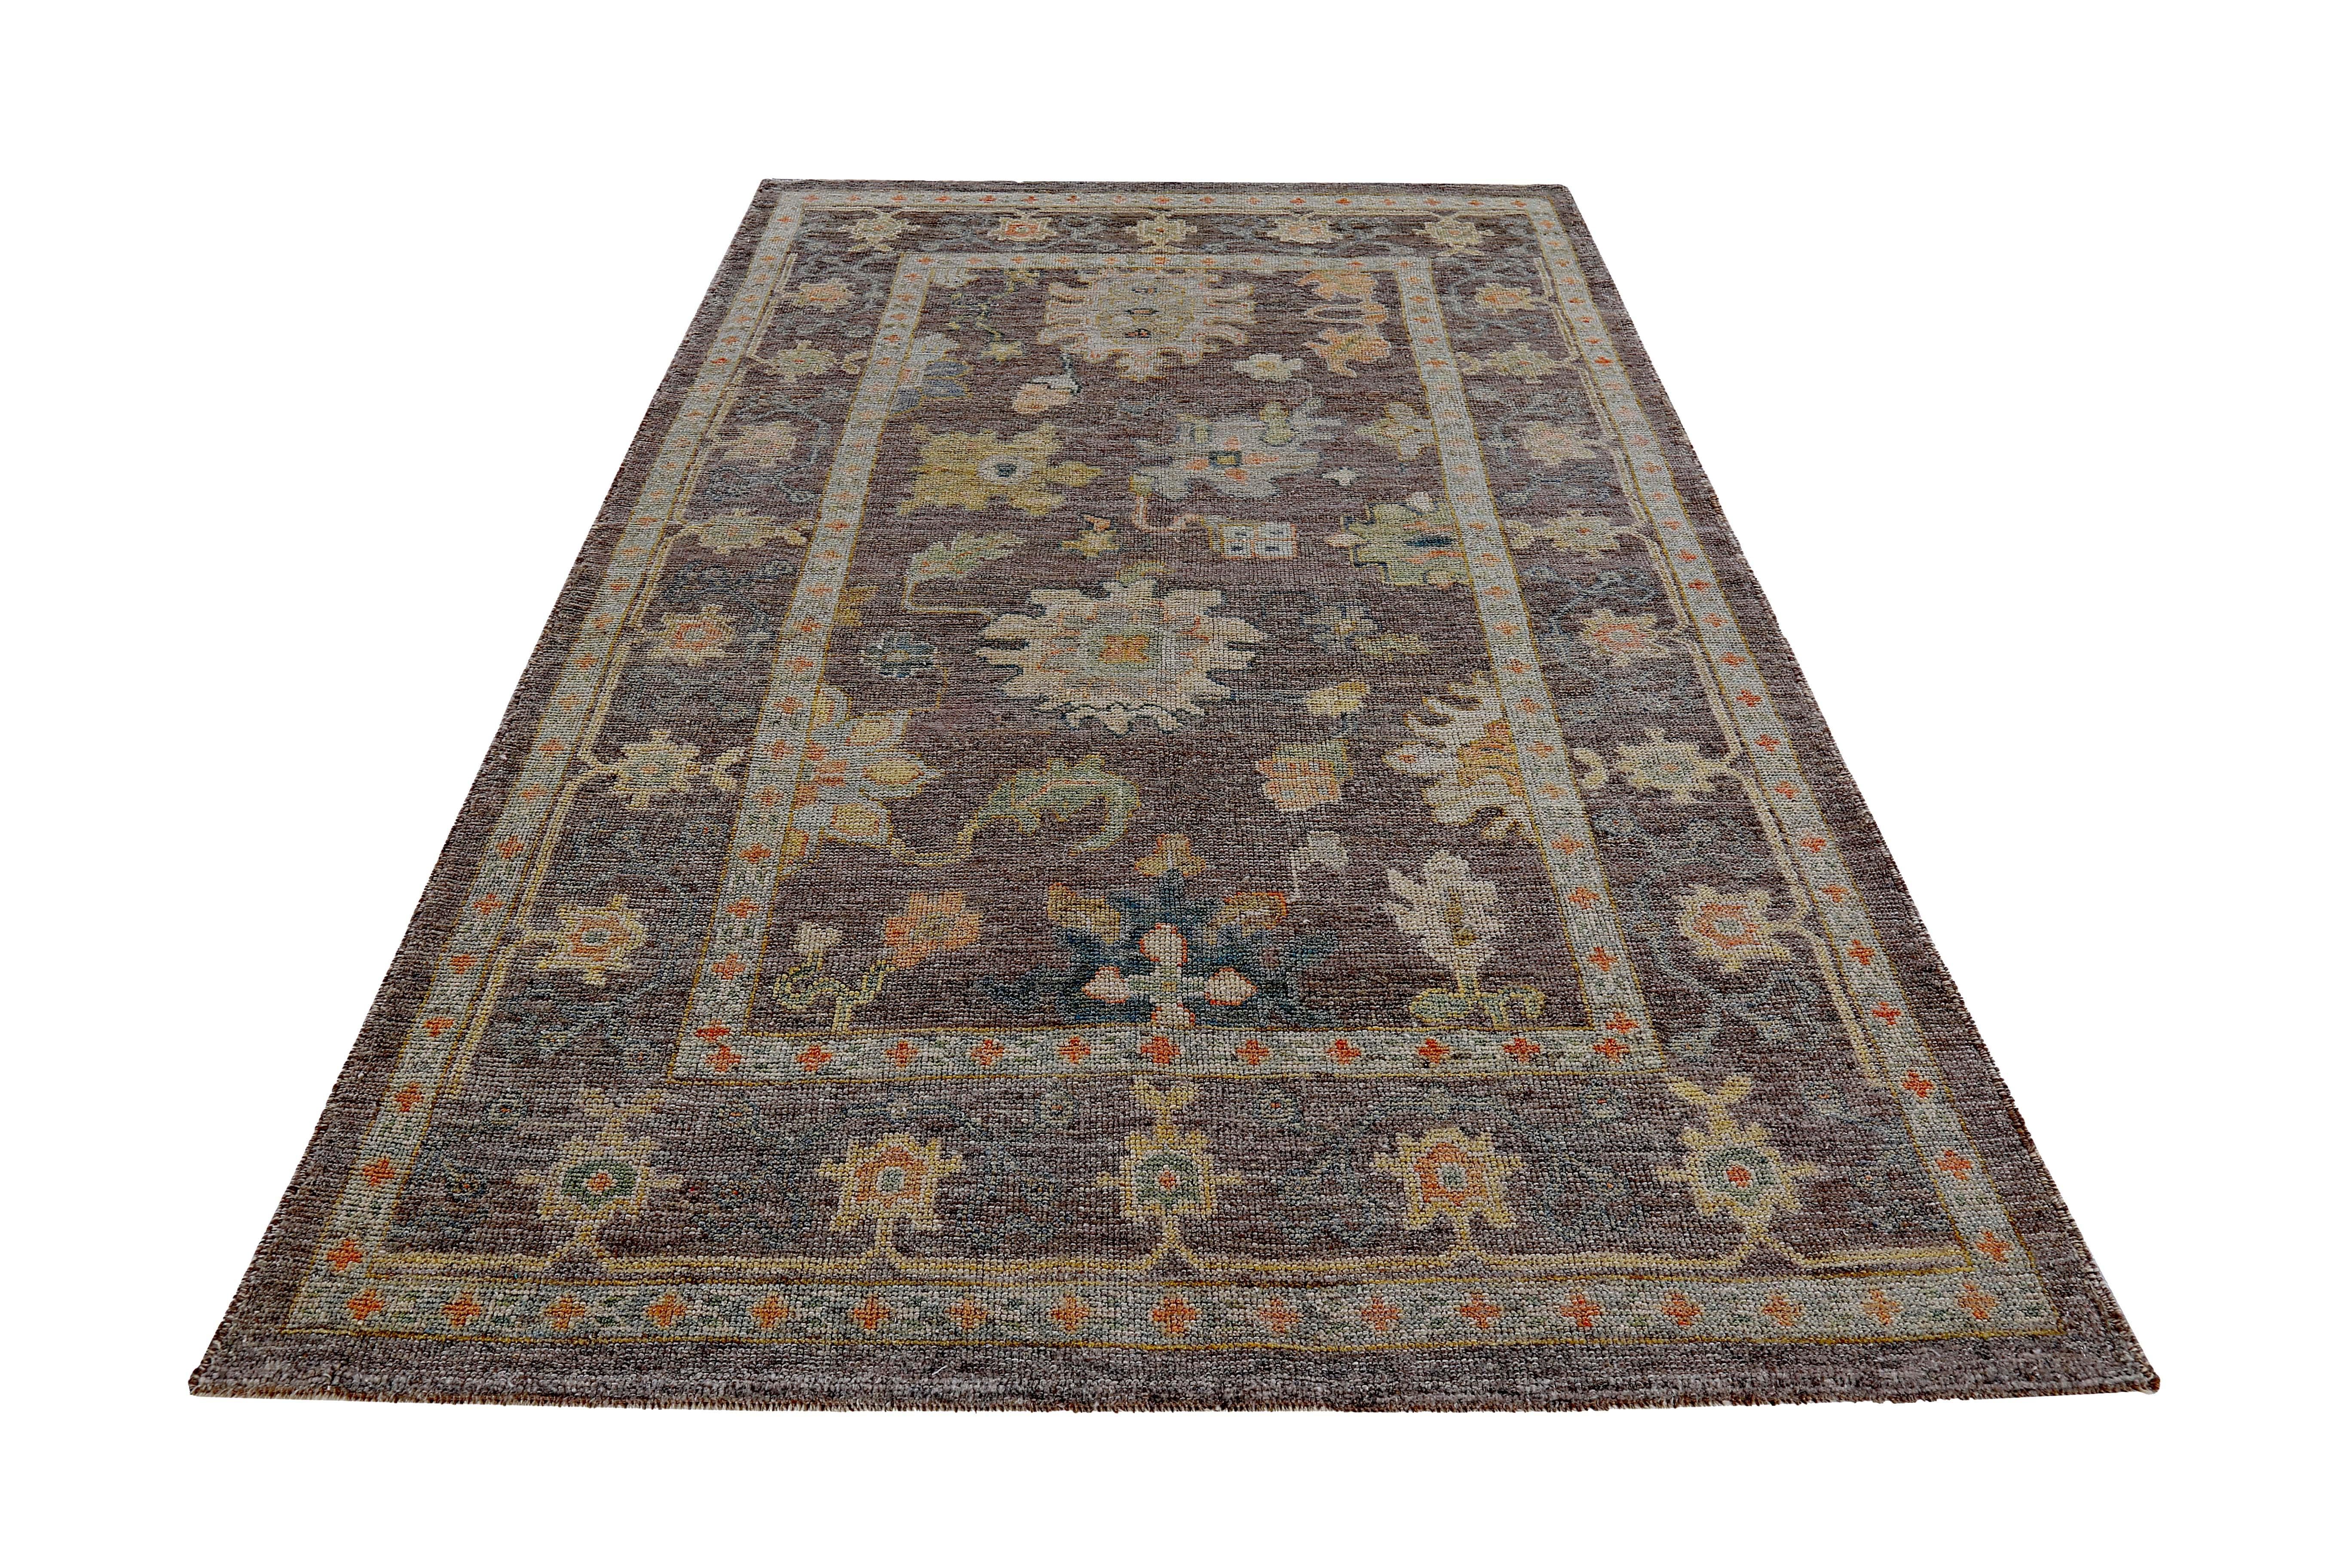 Turkish rug made of handwoven sheep’s wool of the finest quality. It’s colored with organic vegetable dyes that are certified safe for humans and pets alike. It features orange green and blue flower heads on a beautiful brown field. Flower patterns